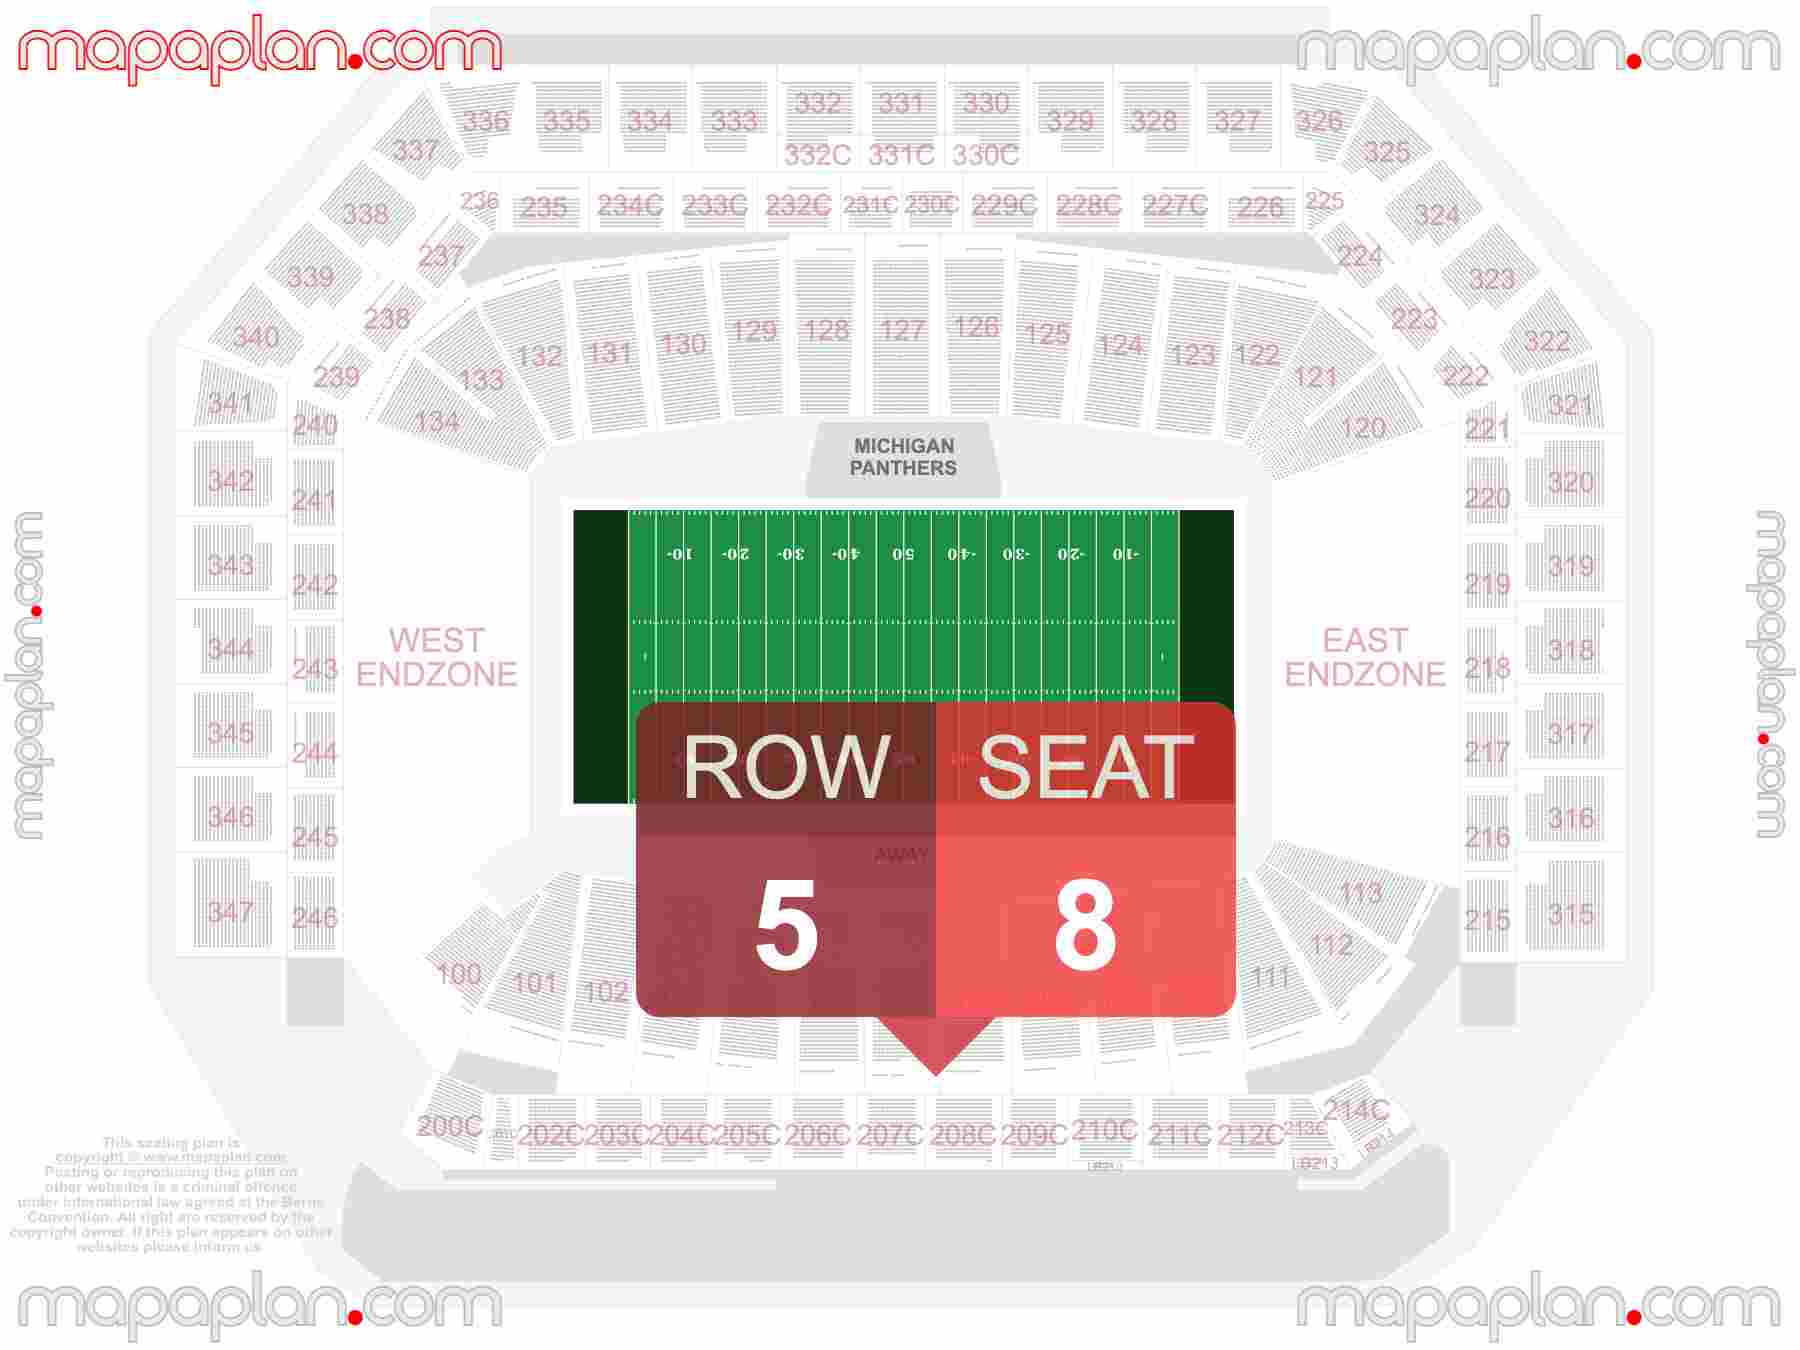 Detroit Ford Field seating chart Lions football inside capacity view arrangement plan - Interactive virtual 3d best seats & rows detailed stadium image configuration layout